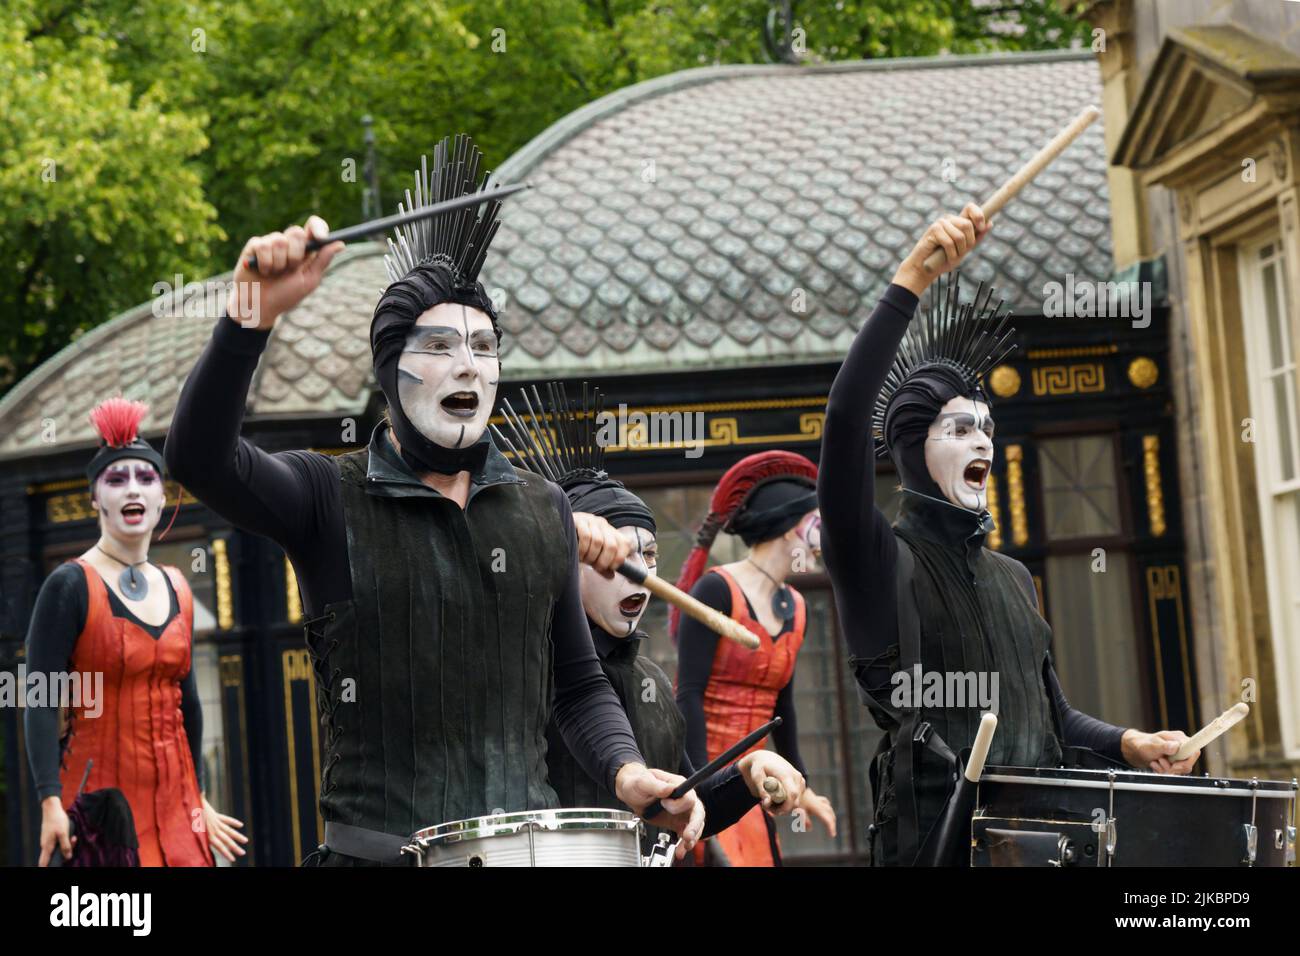 Drummers in black and white face paint performing on the street during the Harrogate Carnival Parade in North Yorkshire, England, UK. Stock Photo